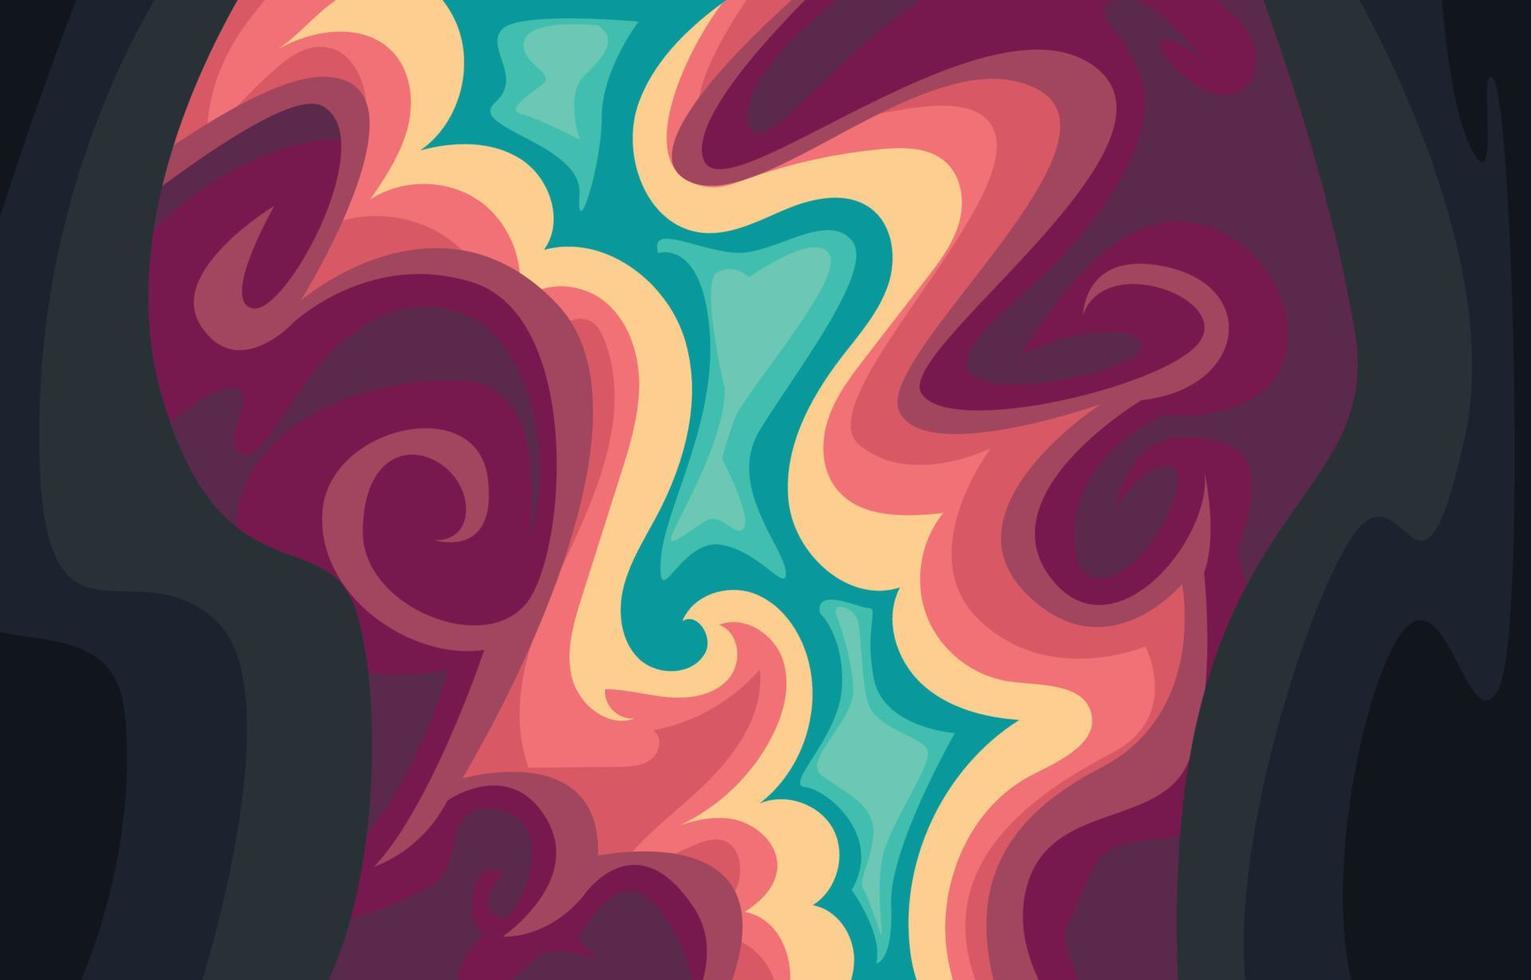 Abstract Cloudy Wave vector